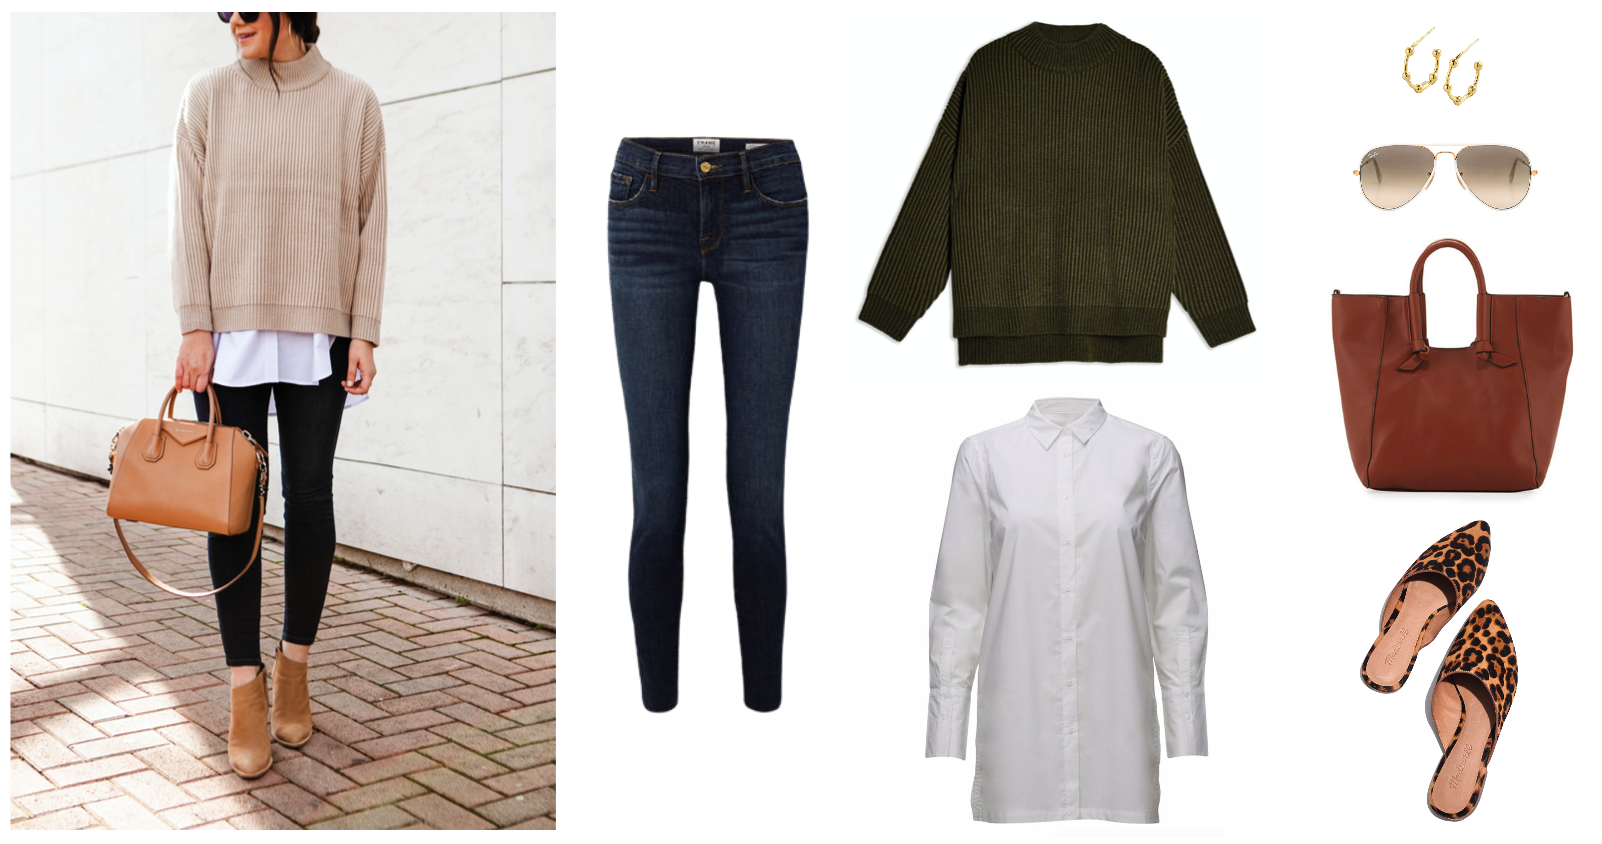 Monday Outfit: A Layered Casual Look